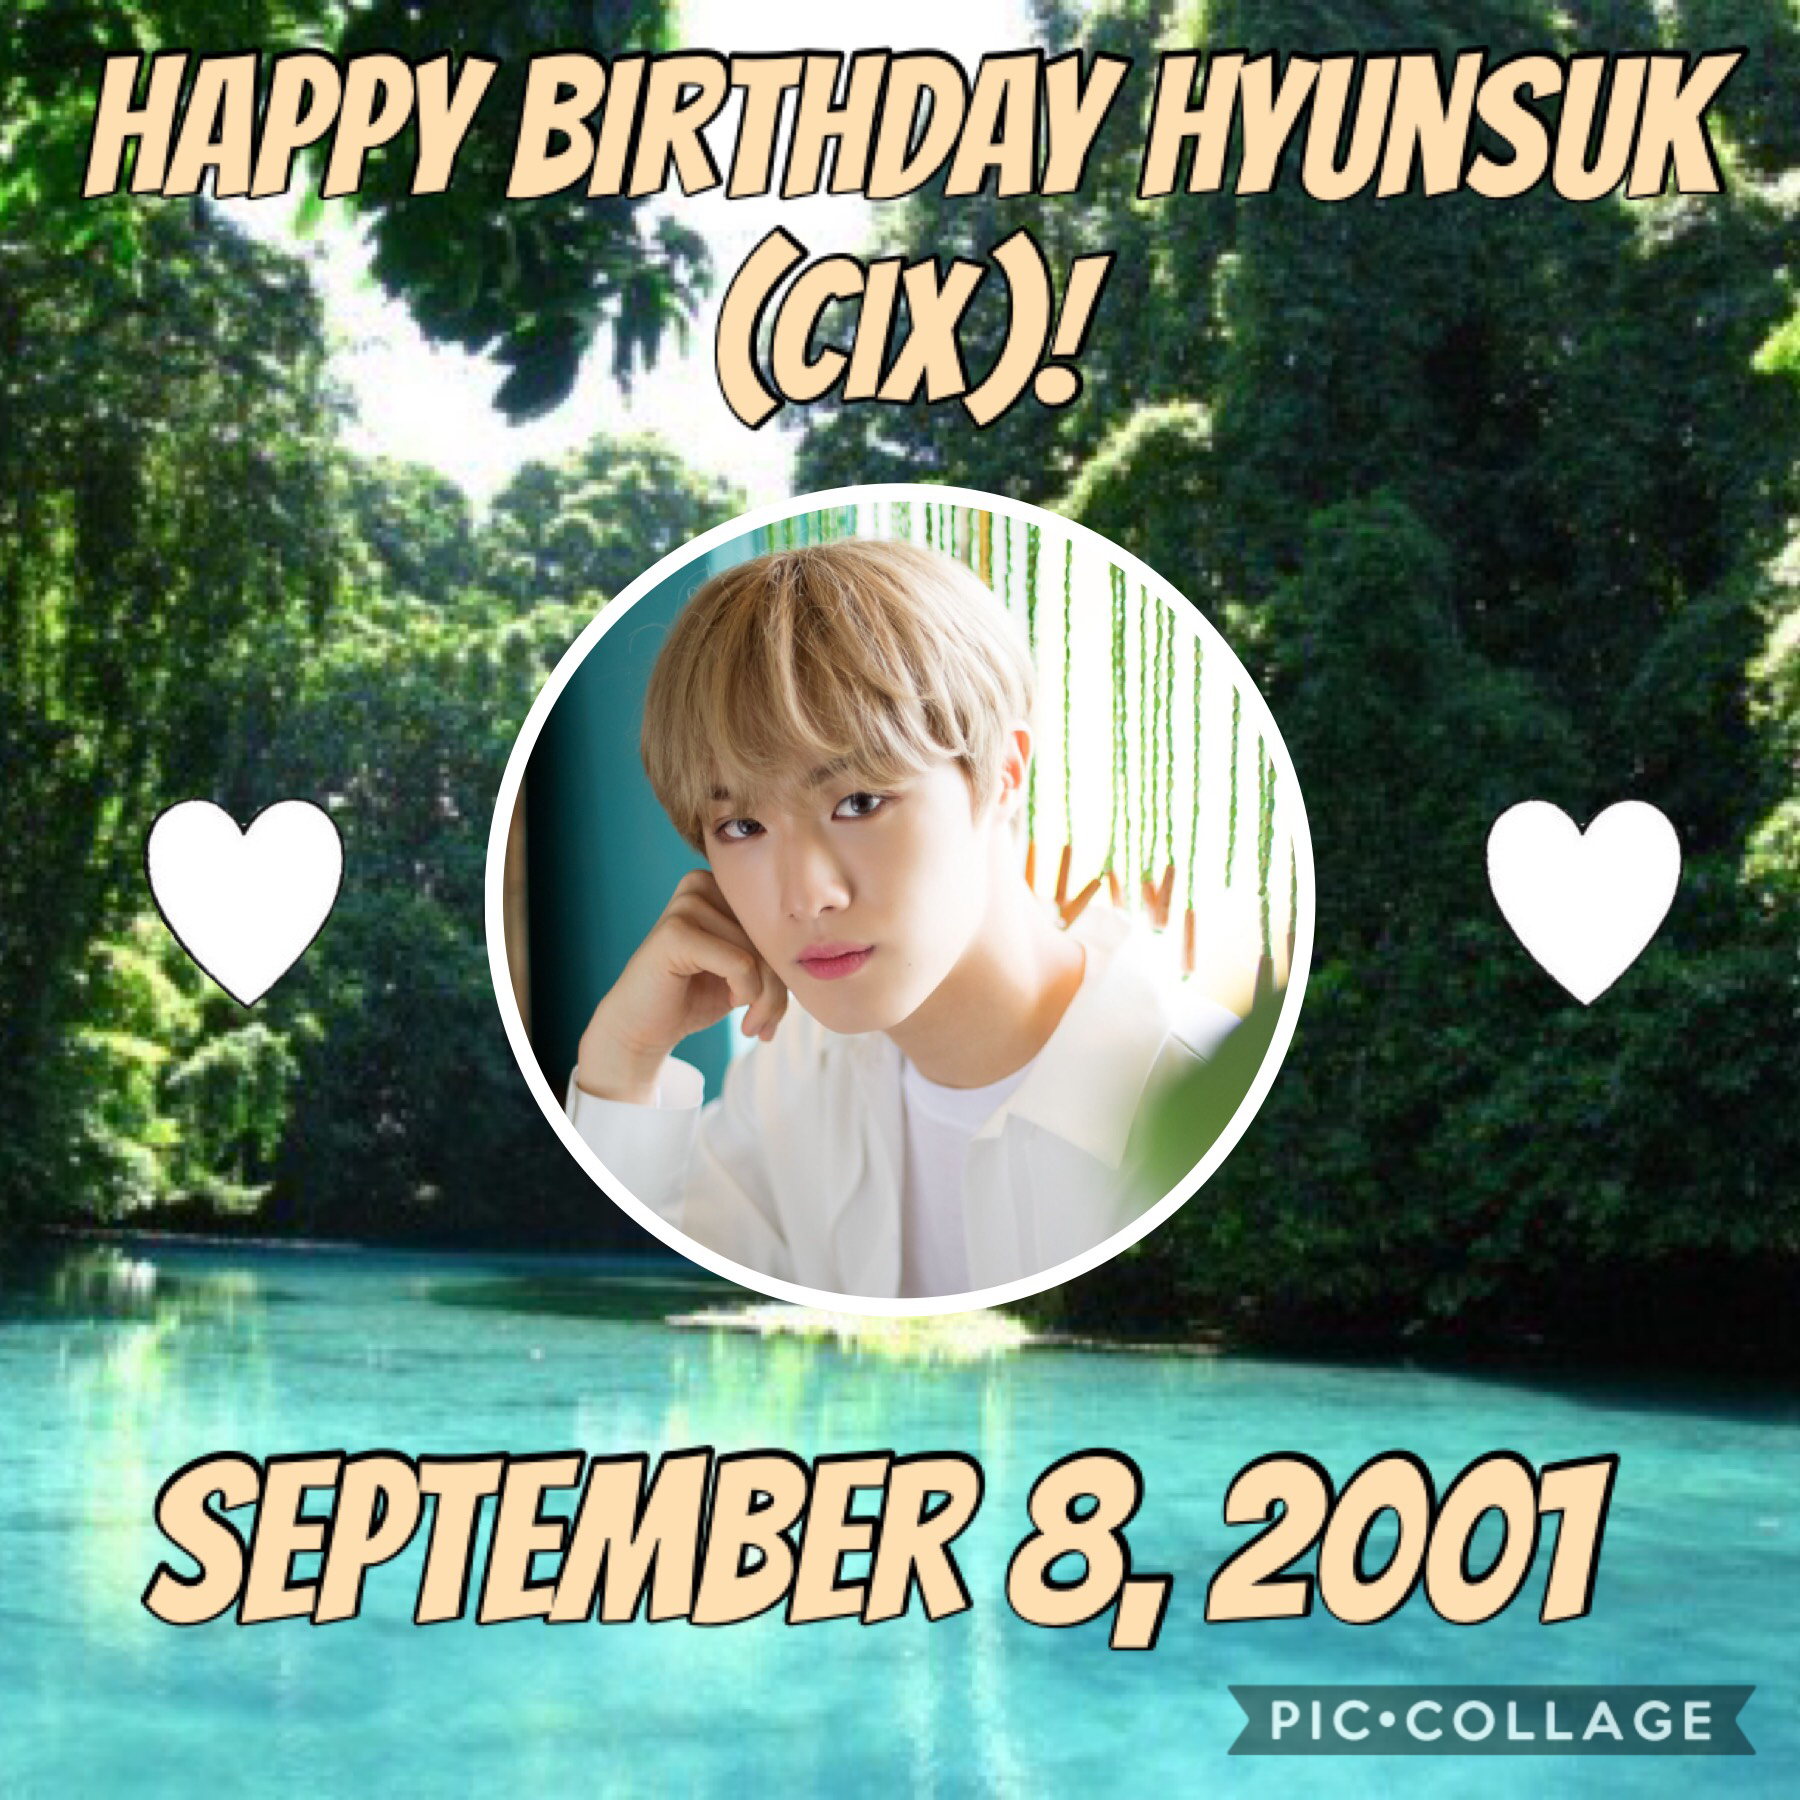 •Yoon Hyunsuk•
Omg happy birthday!! How is he so young yet he pulled off the Movie Star concept so well??? Ah I love him:)
🍃🌴🍃🌴Whoop🌴🍃🌴🍃